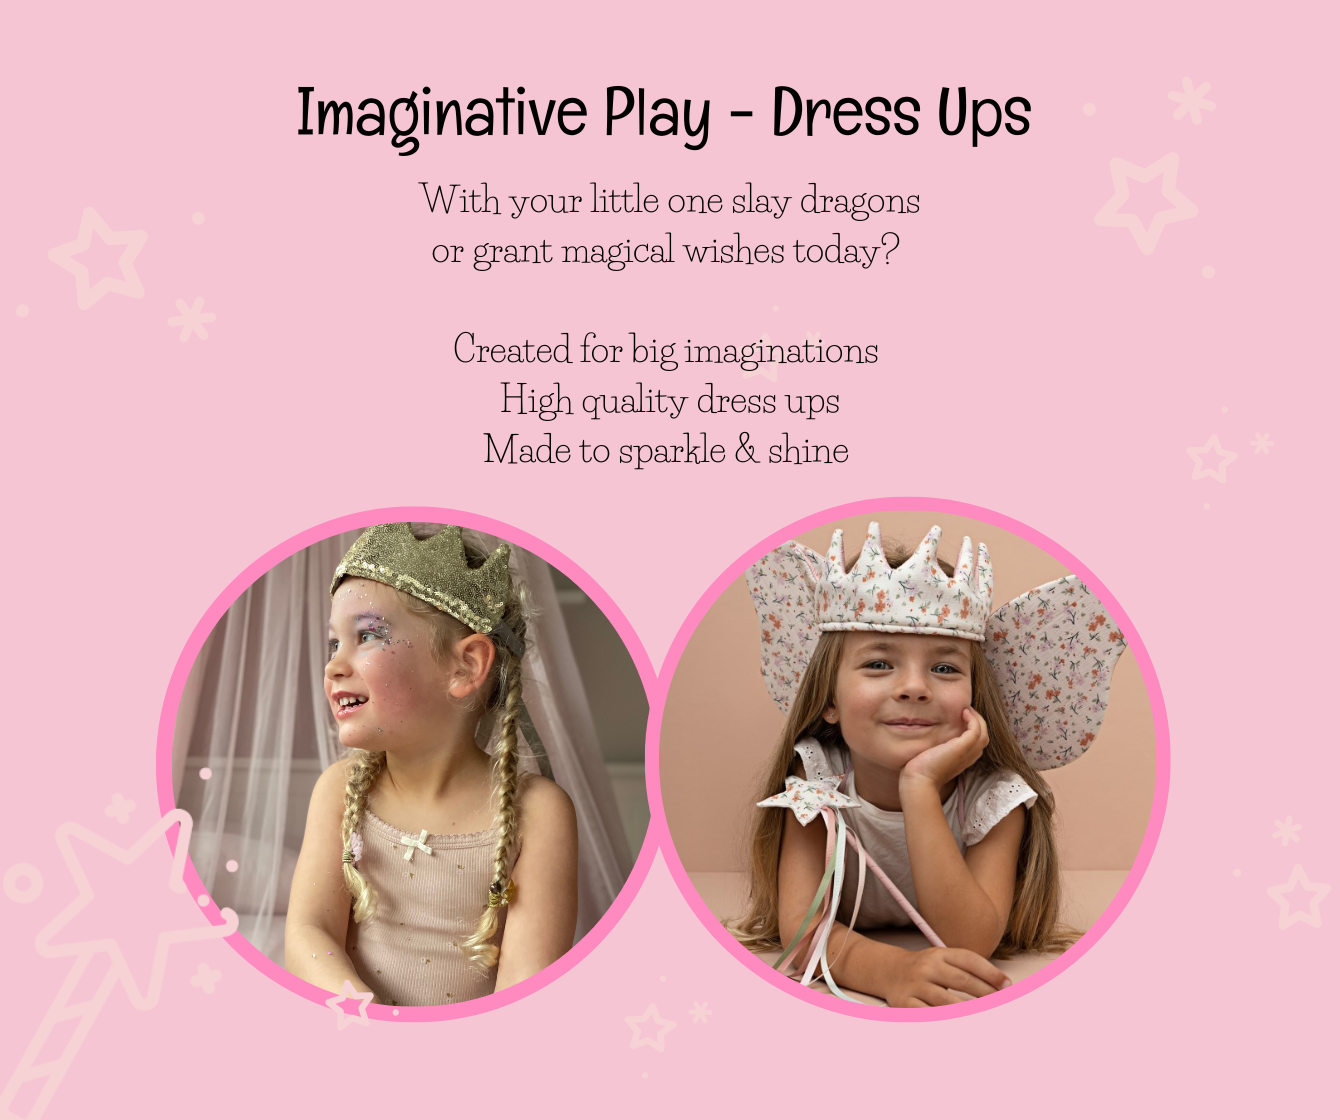 Play ideas for kids to extend their imaginations